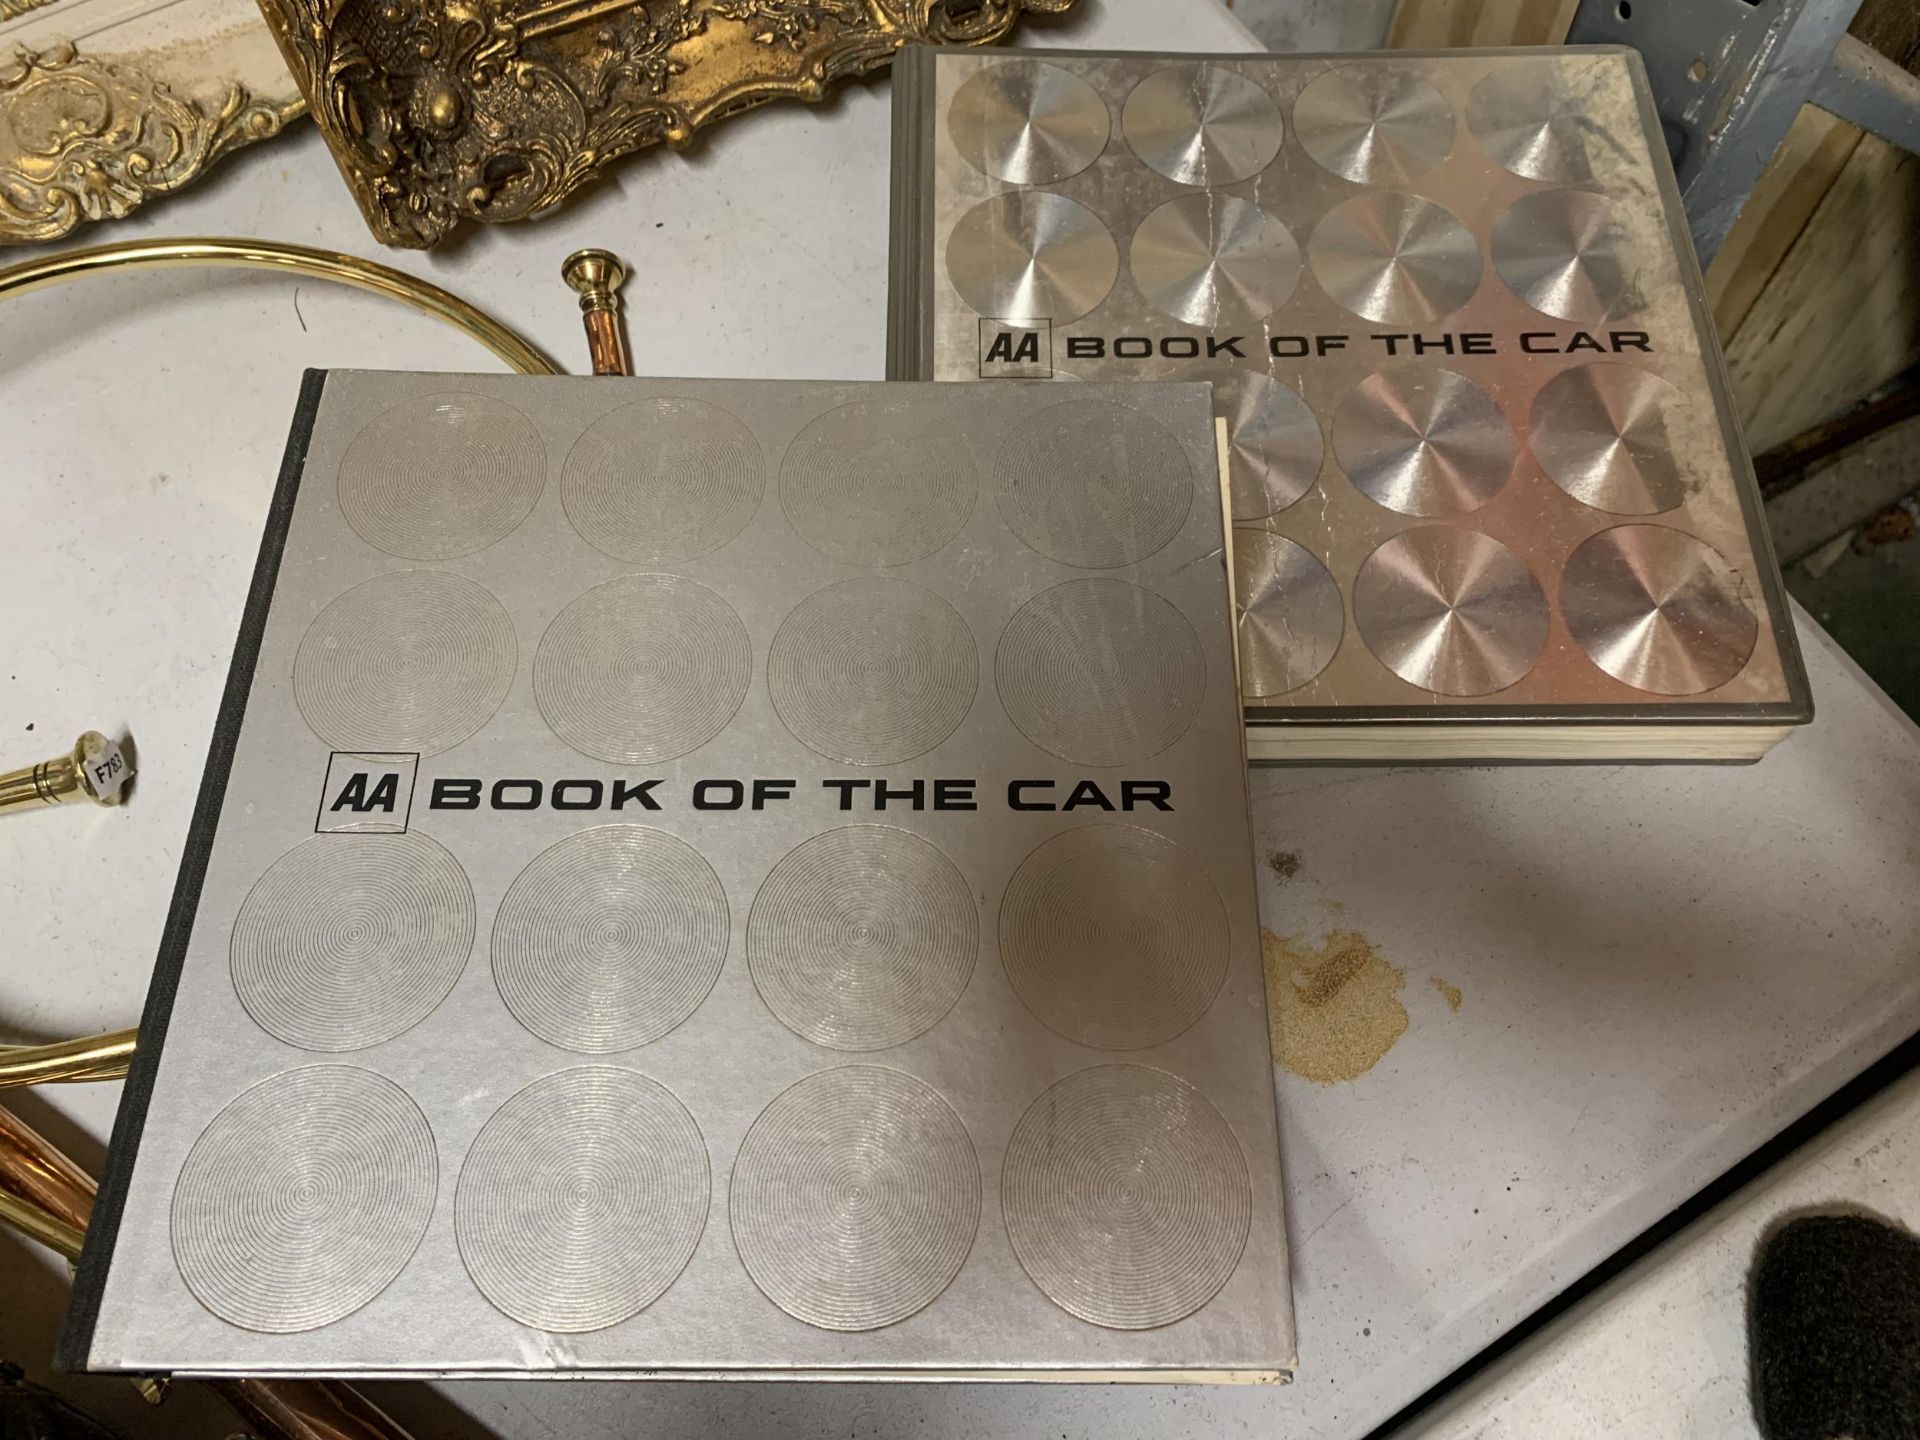 TWO COPIES OF THE AA BOOK OF THE CAR